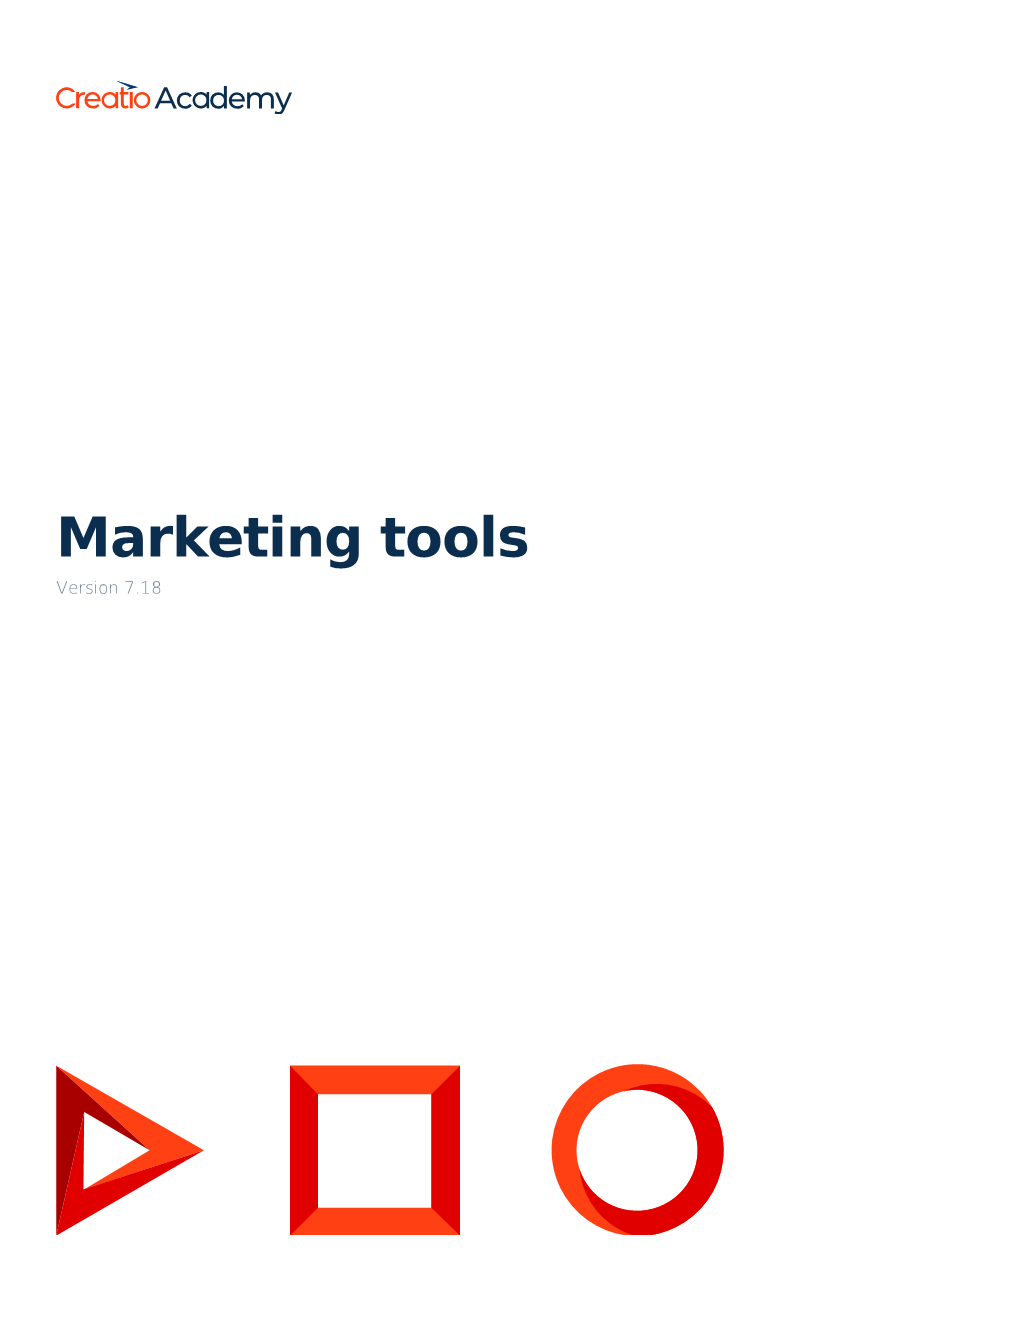 Marketing Tools Version 7.18 This Documentation Is Provided Under Restrictions on Use and Are Protected by Intellectual Property Laws